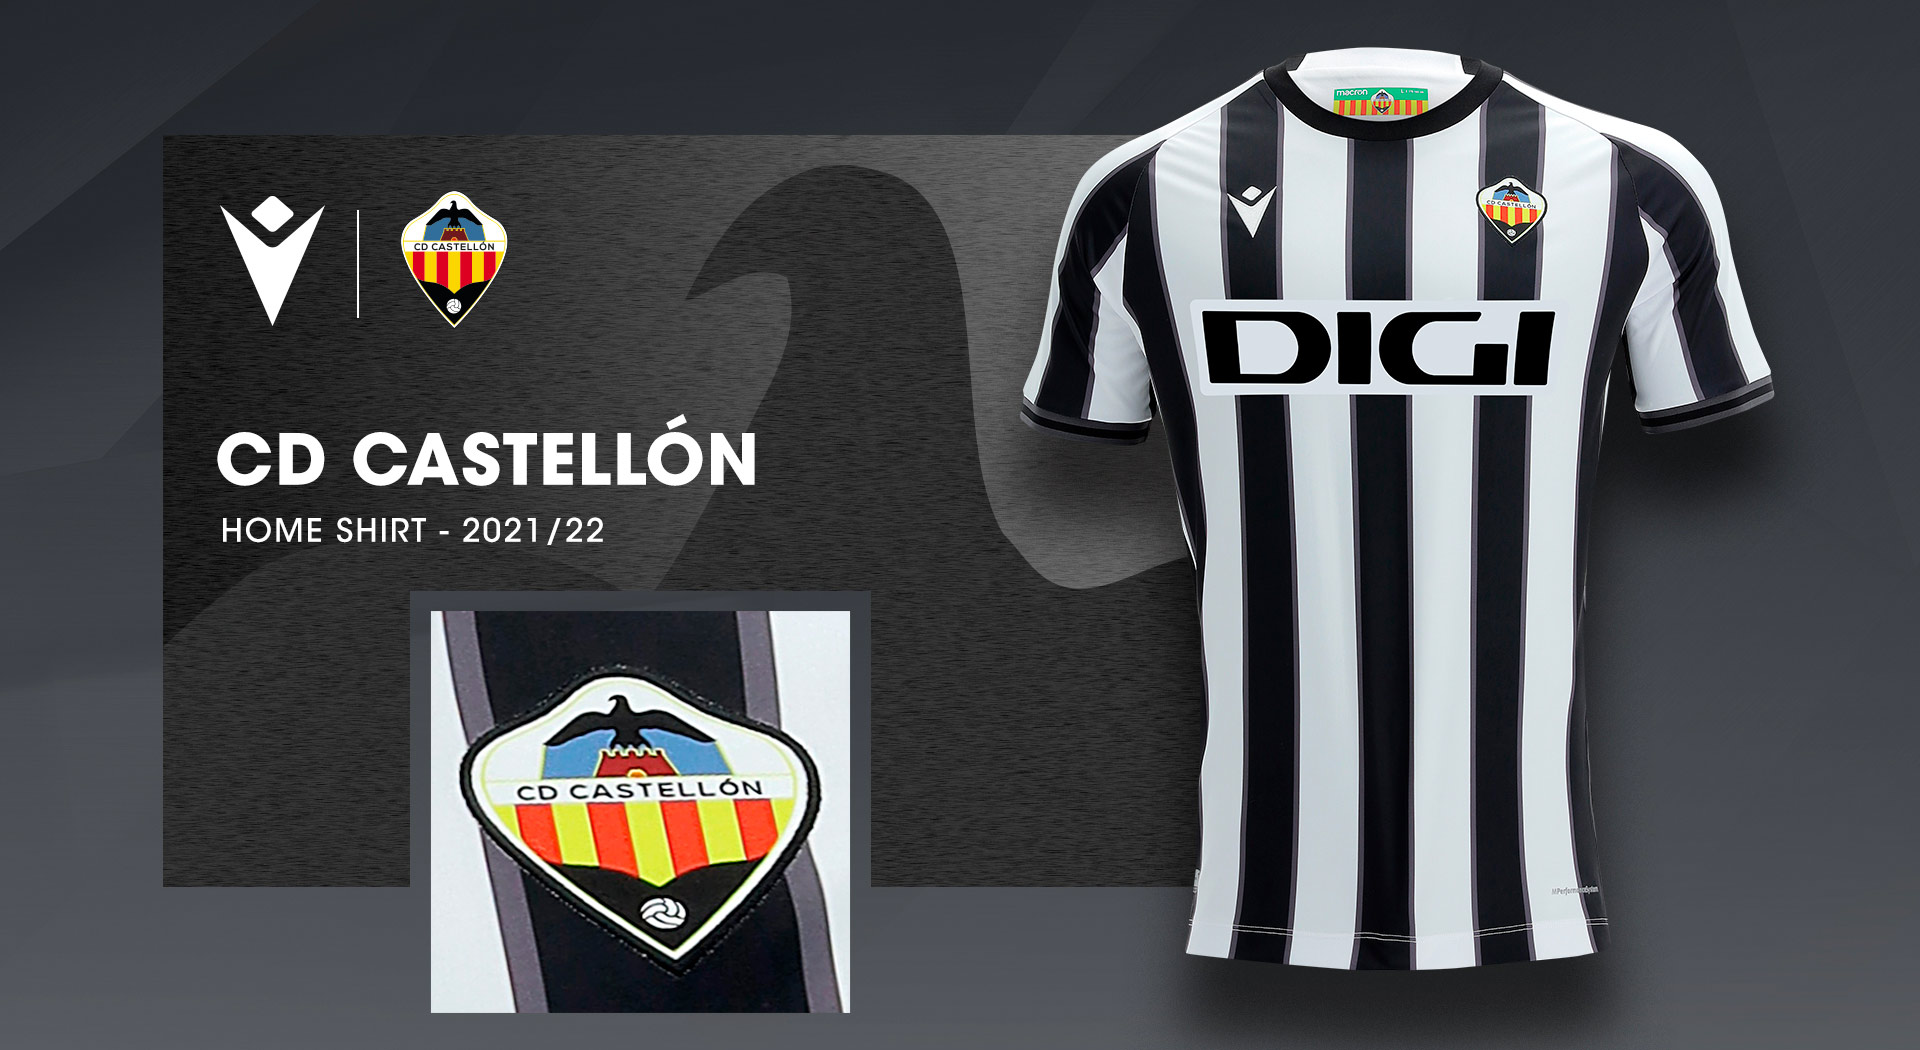 Disgust Universal speech CD CASTELLON HOME AND AWAY JERSEYS PAY TRIBUTE TO ALBINEGRO TRADITIONS AND  LOCAL COMMUNITY | Work Hard. Play Harder | Macron